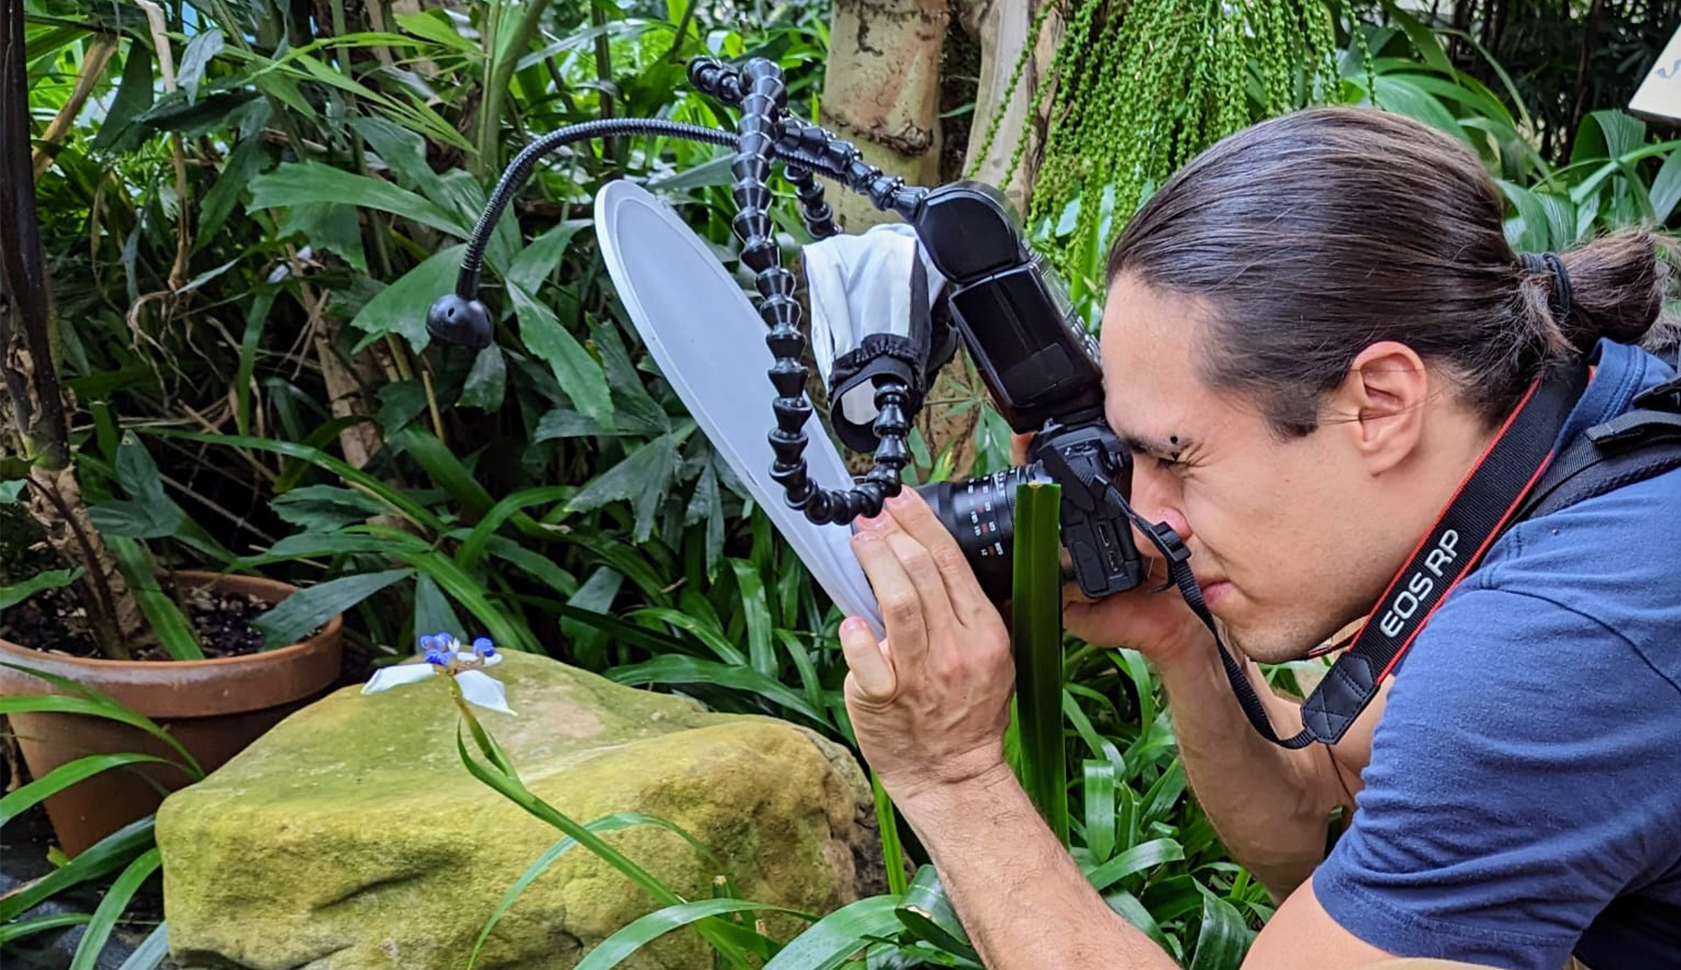 Diego Huet exchanges microscope for camera to capture nature’s beauty